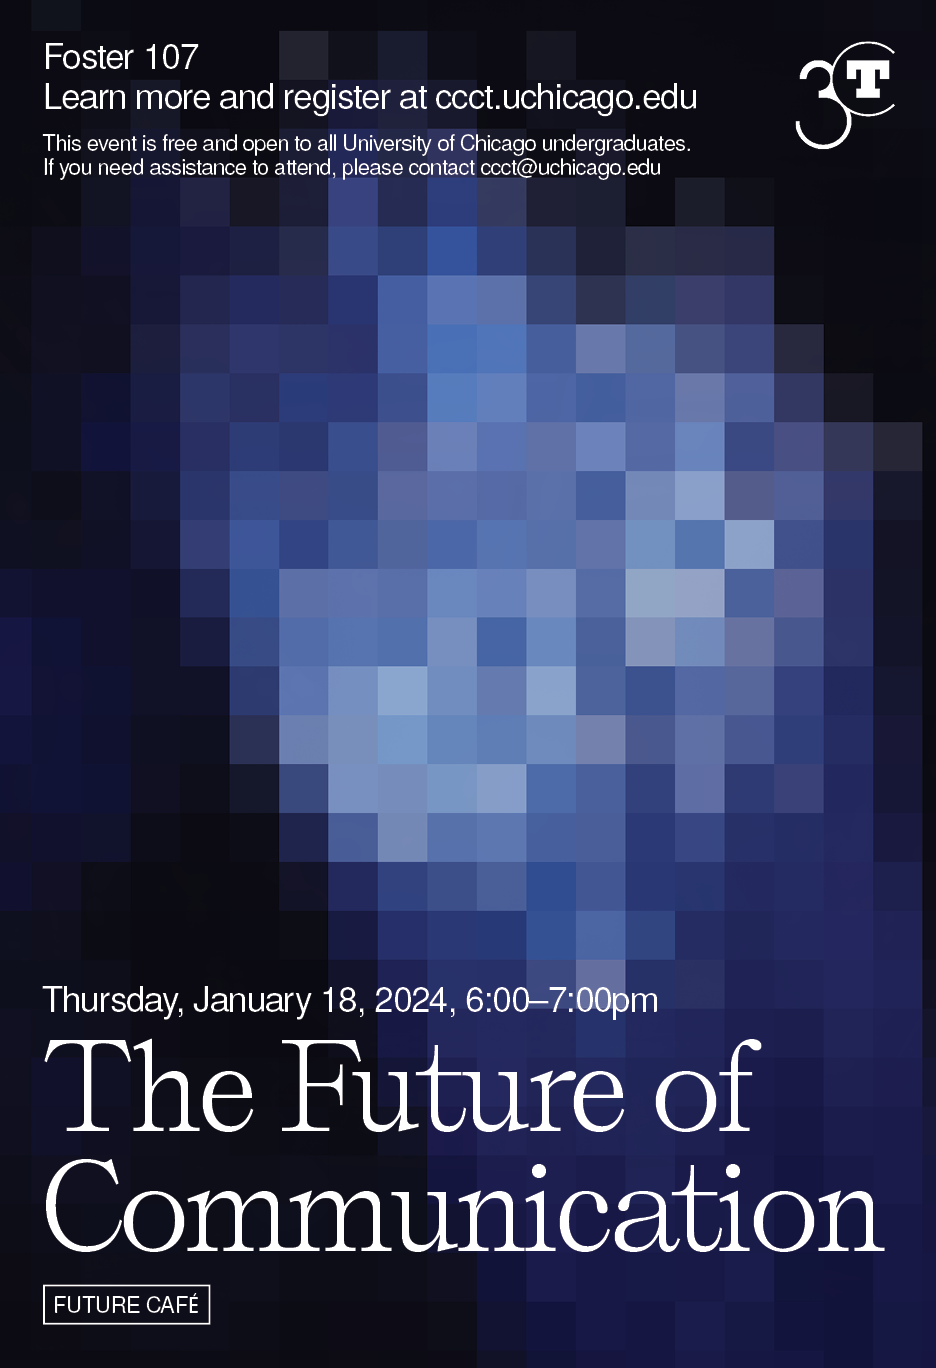 Event poster featuring white text over a pixelated white and blue background